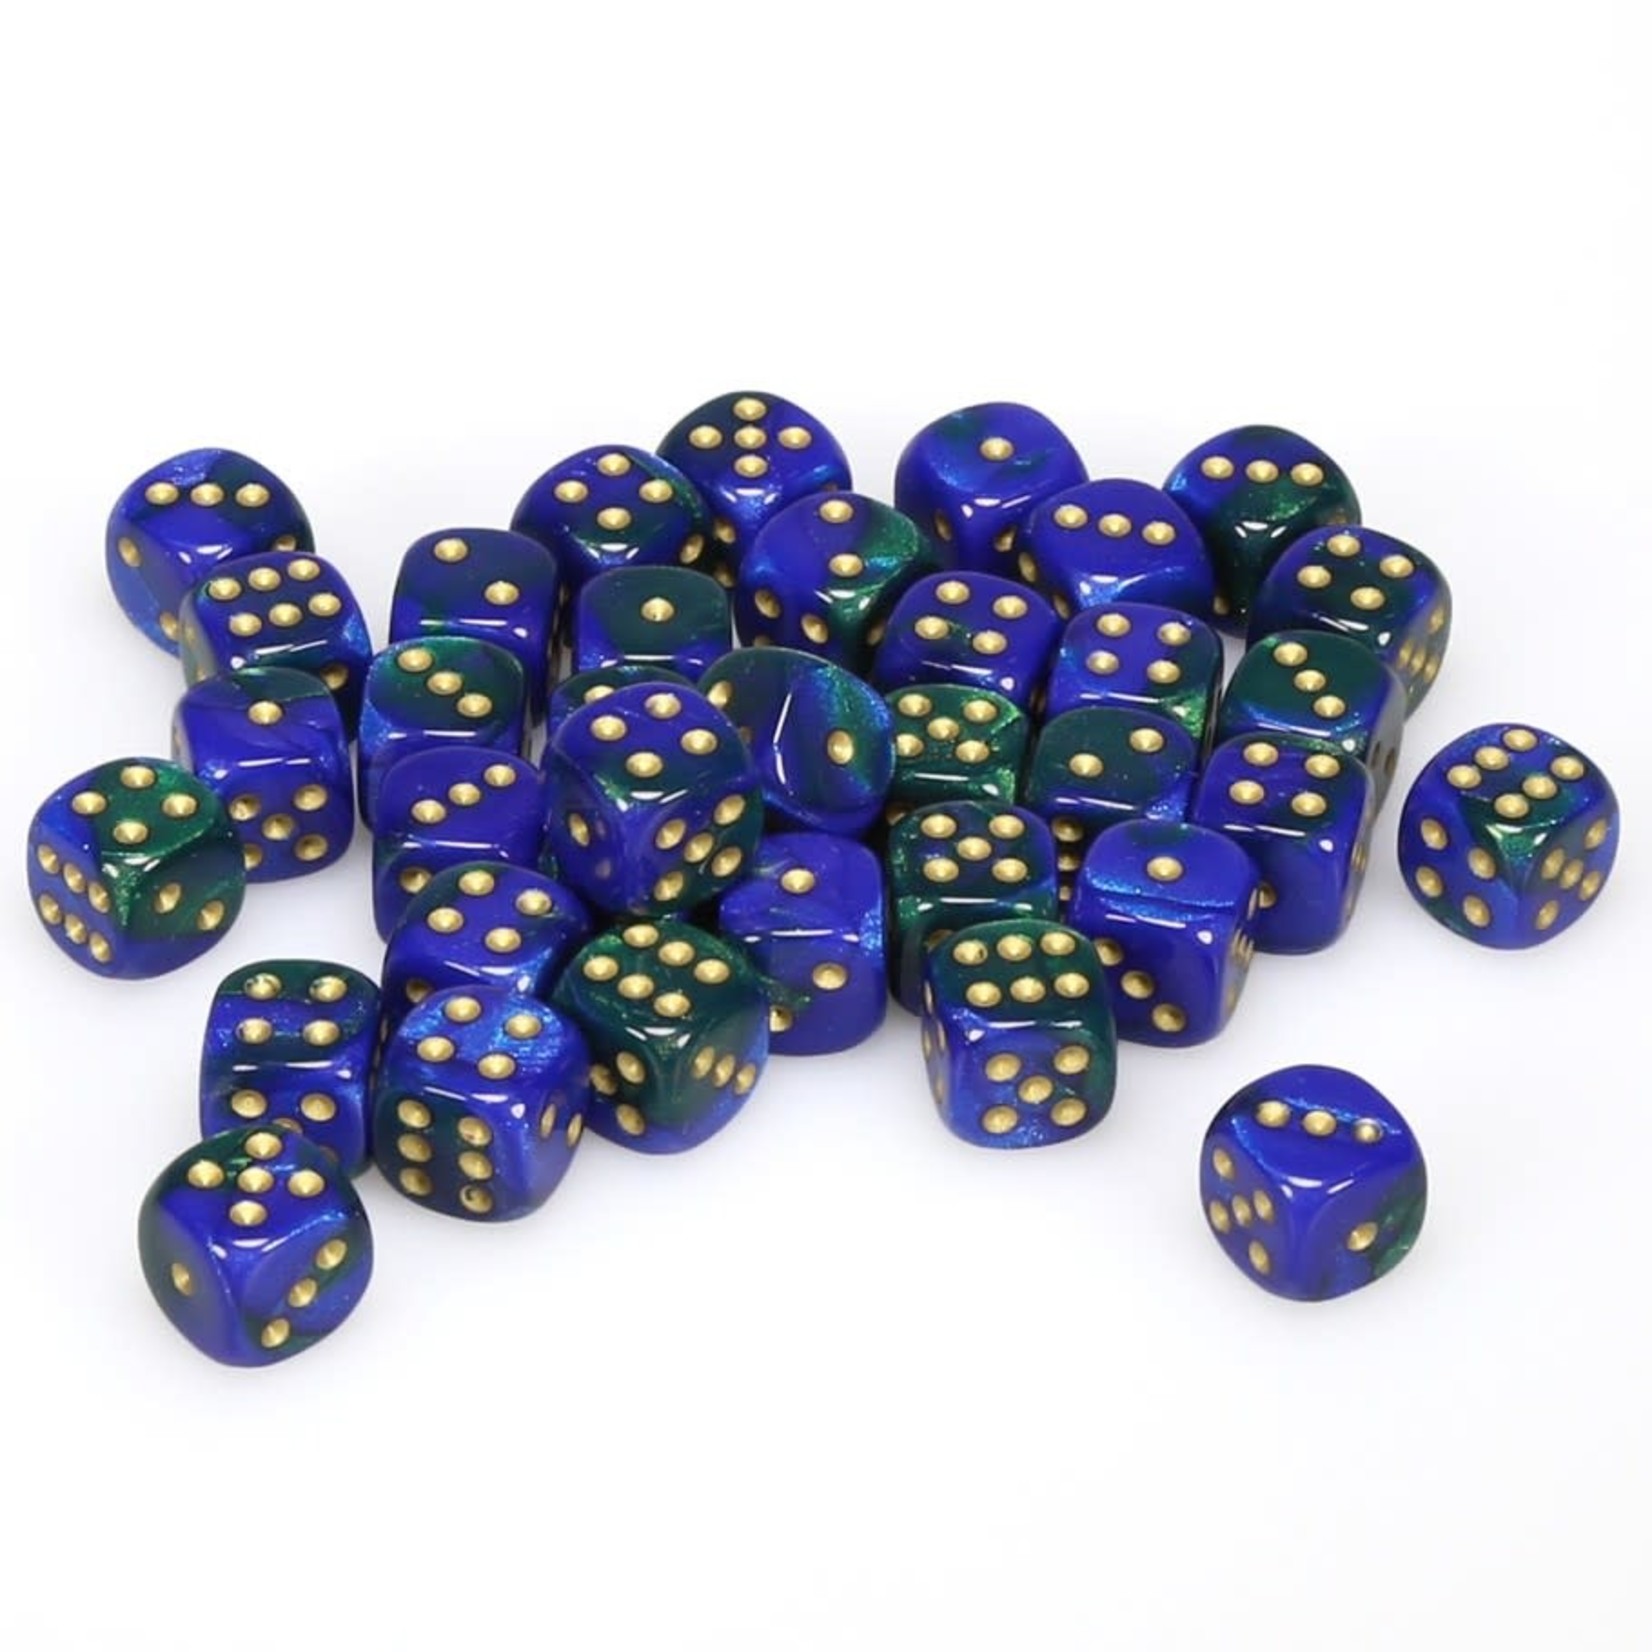 Chessex Chessex Gemini Blue-Green / Gold with Black 12 mm d6 36 die set